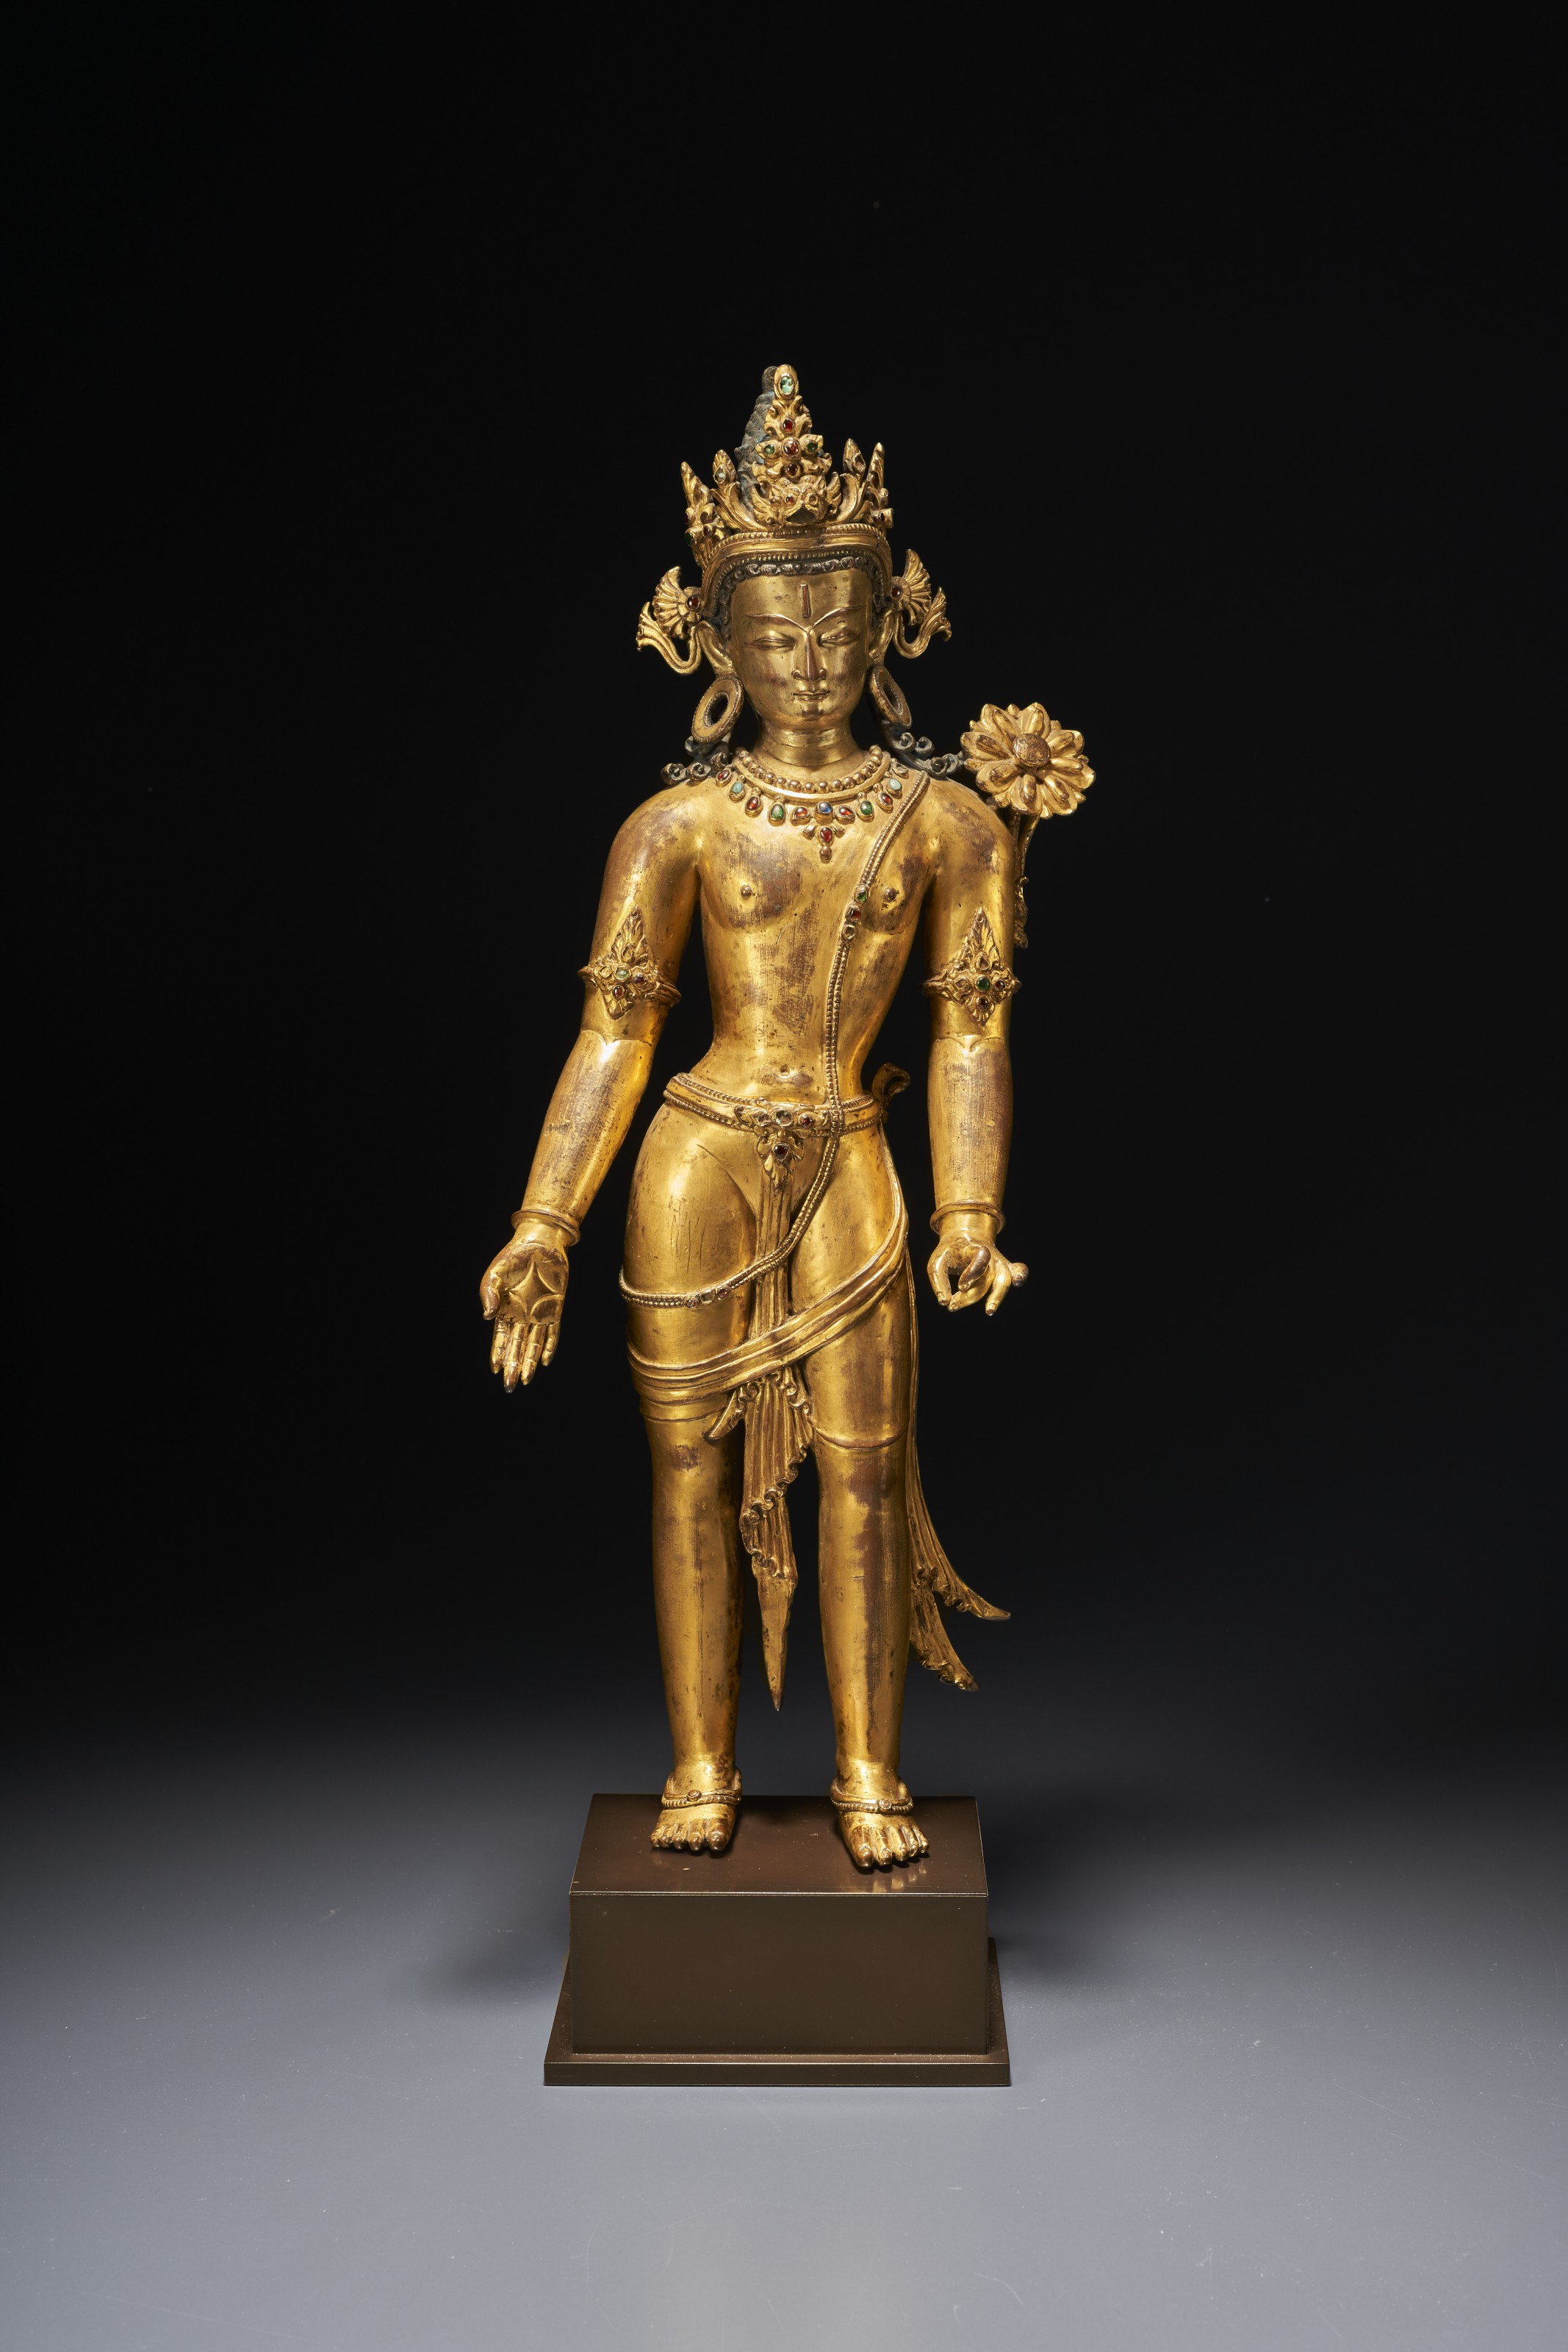 PROPERTY FROM A PRIVATE AMERICAN COLLECTION AN IMPORTANT GILT-COPPER FIGURE OF PADMAPANI LOKESHVARA NEPAL, 13TH CENTURY $2,000,000 - 3,000,000